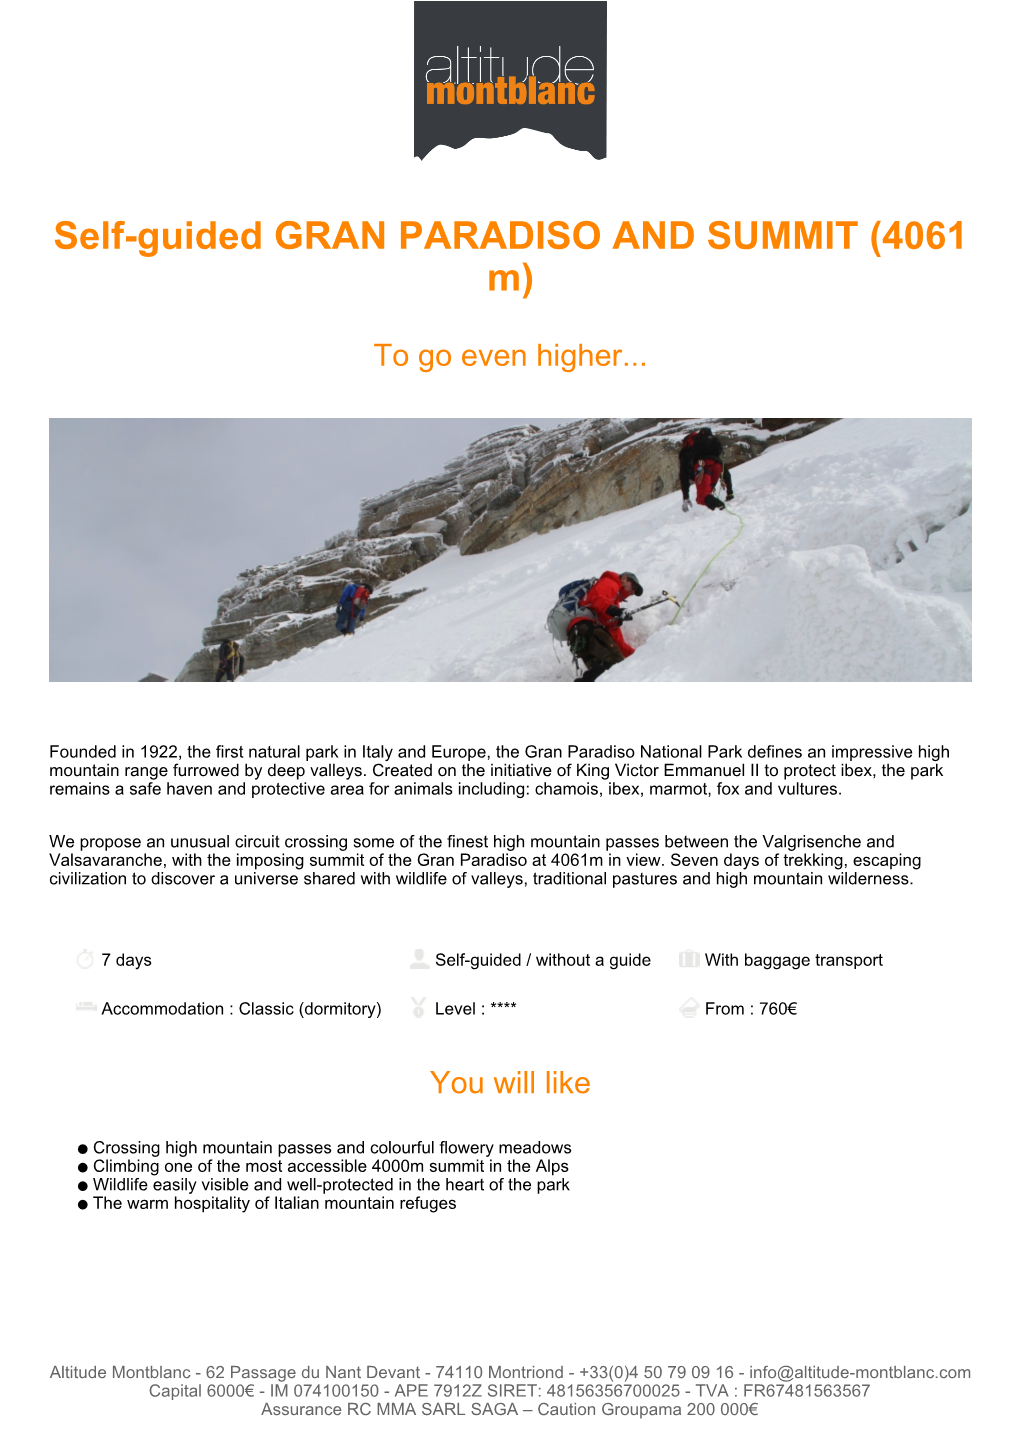 Self-Guided GRAN PARADISO and SUMMIT (4061 M)